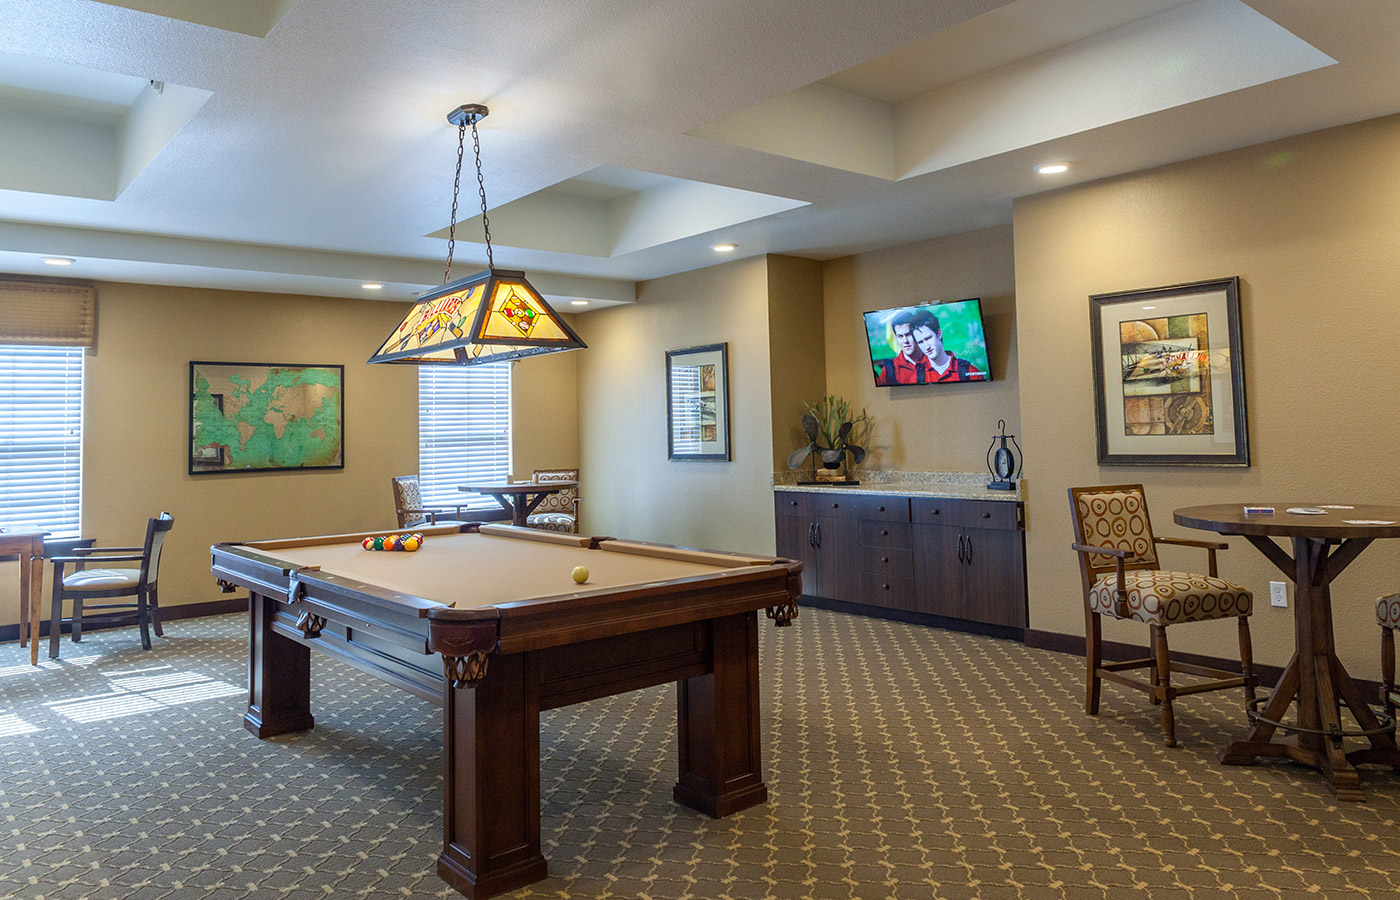 Billiard room includes table and various other amenities.